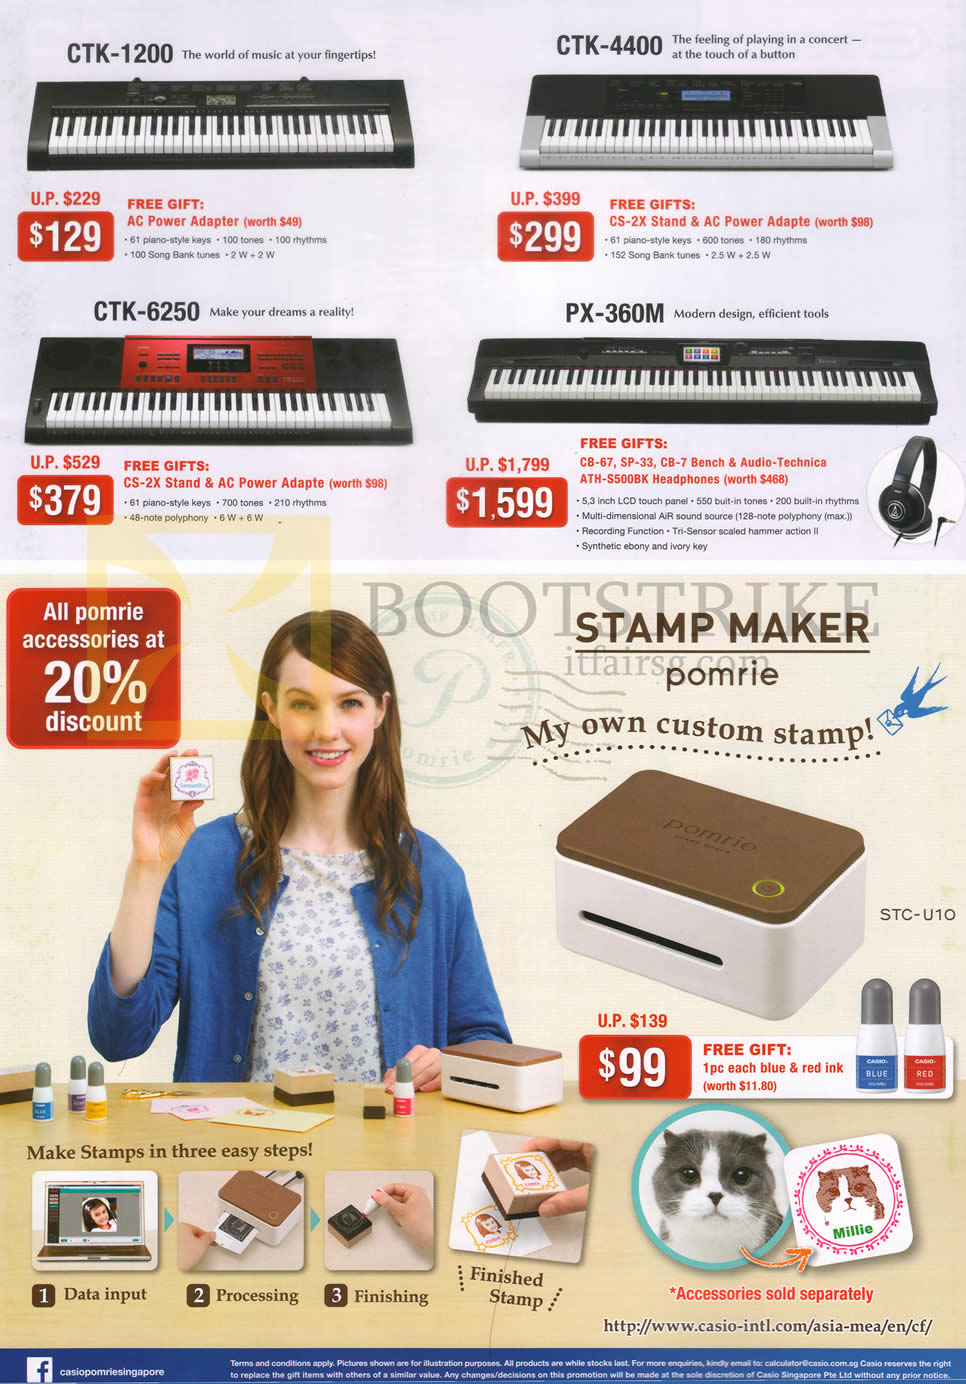 IT SHOW 2016 price list image brochure of Casio Music Keyboards, Stamp Maker, CTK-1200, 4400, 6250, PX-360M